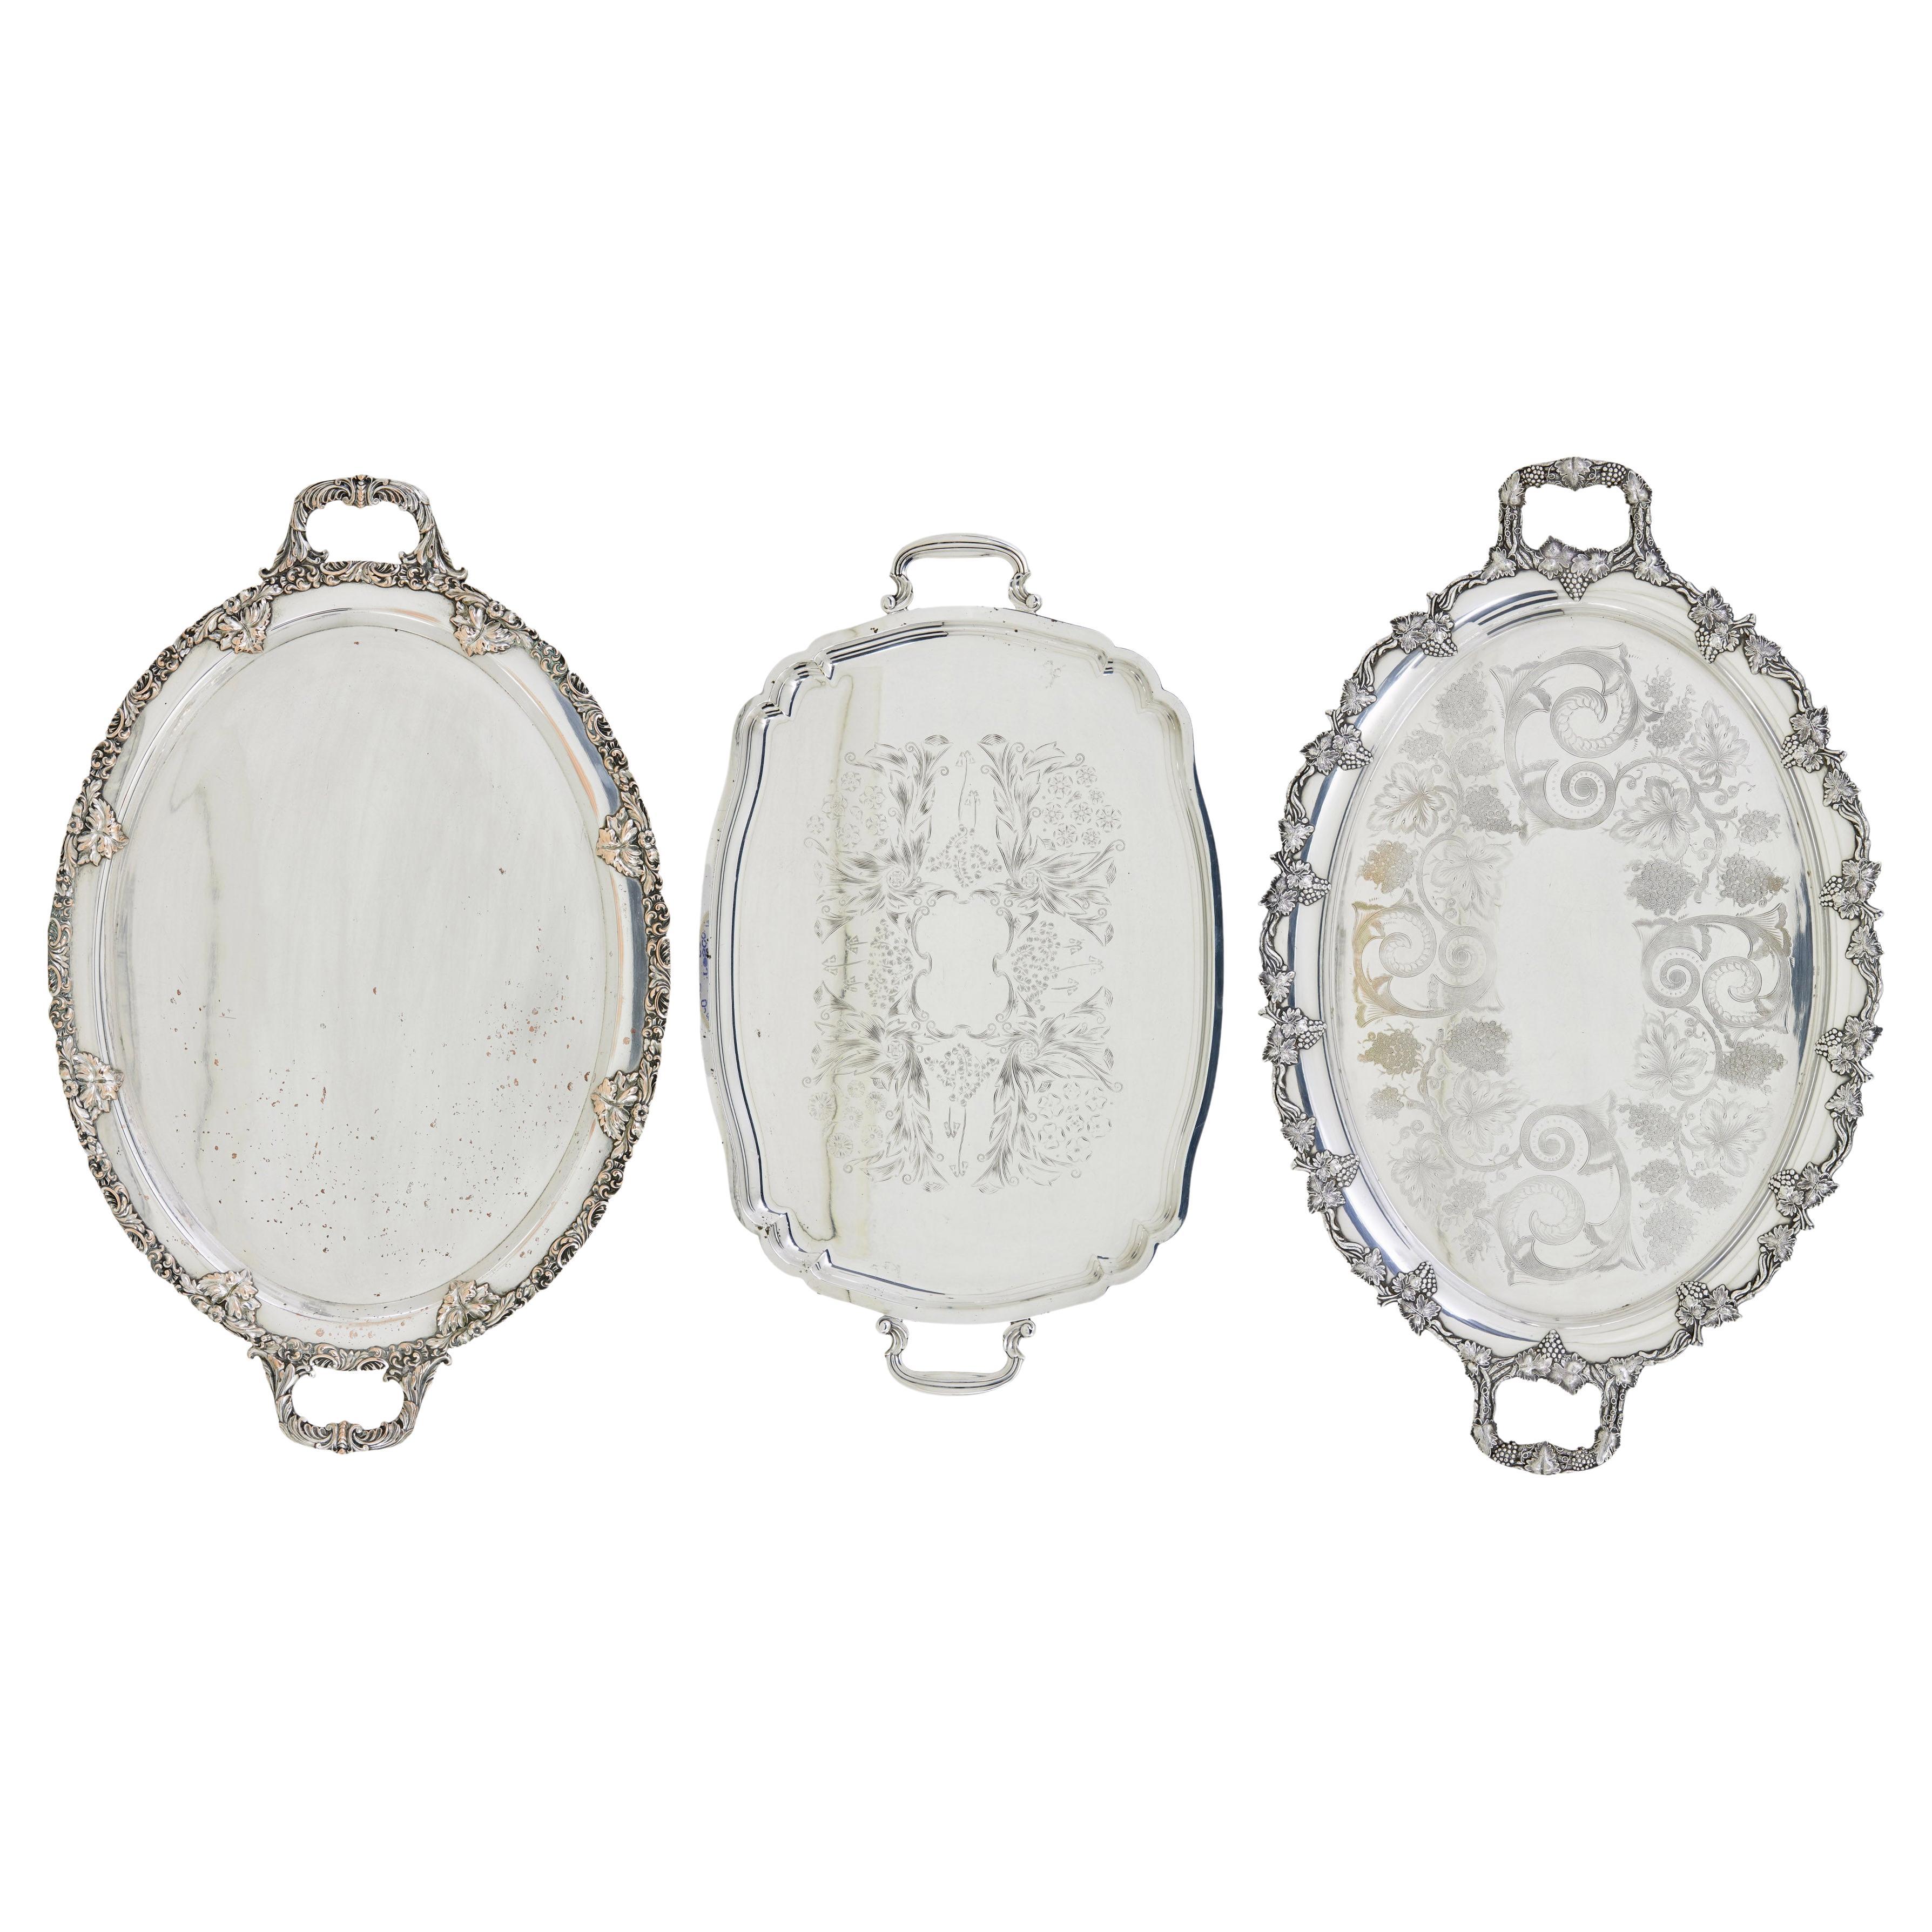 Collection of 3 silver plate ornate trays For Sale